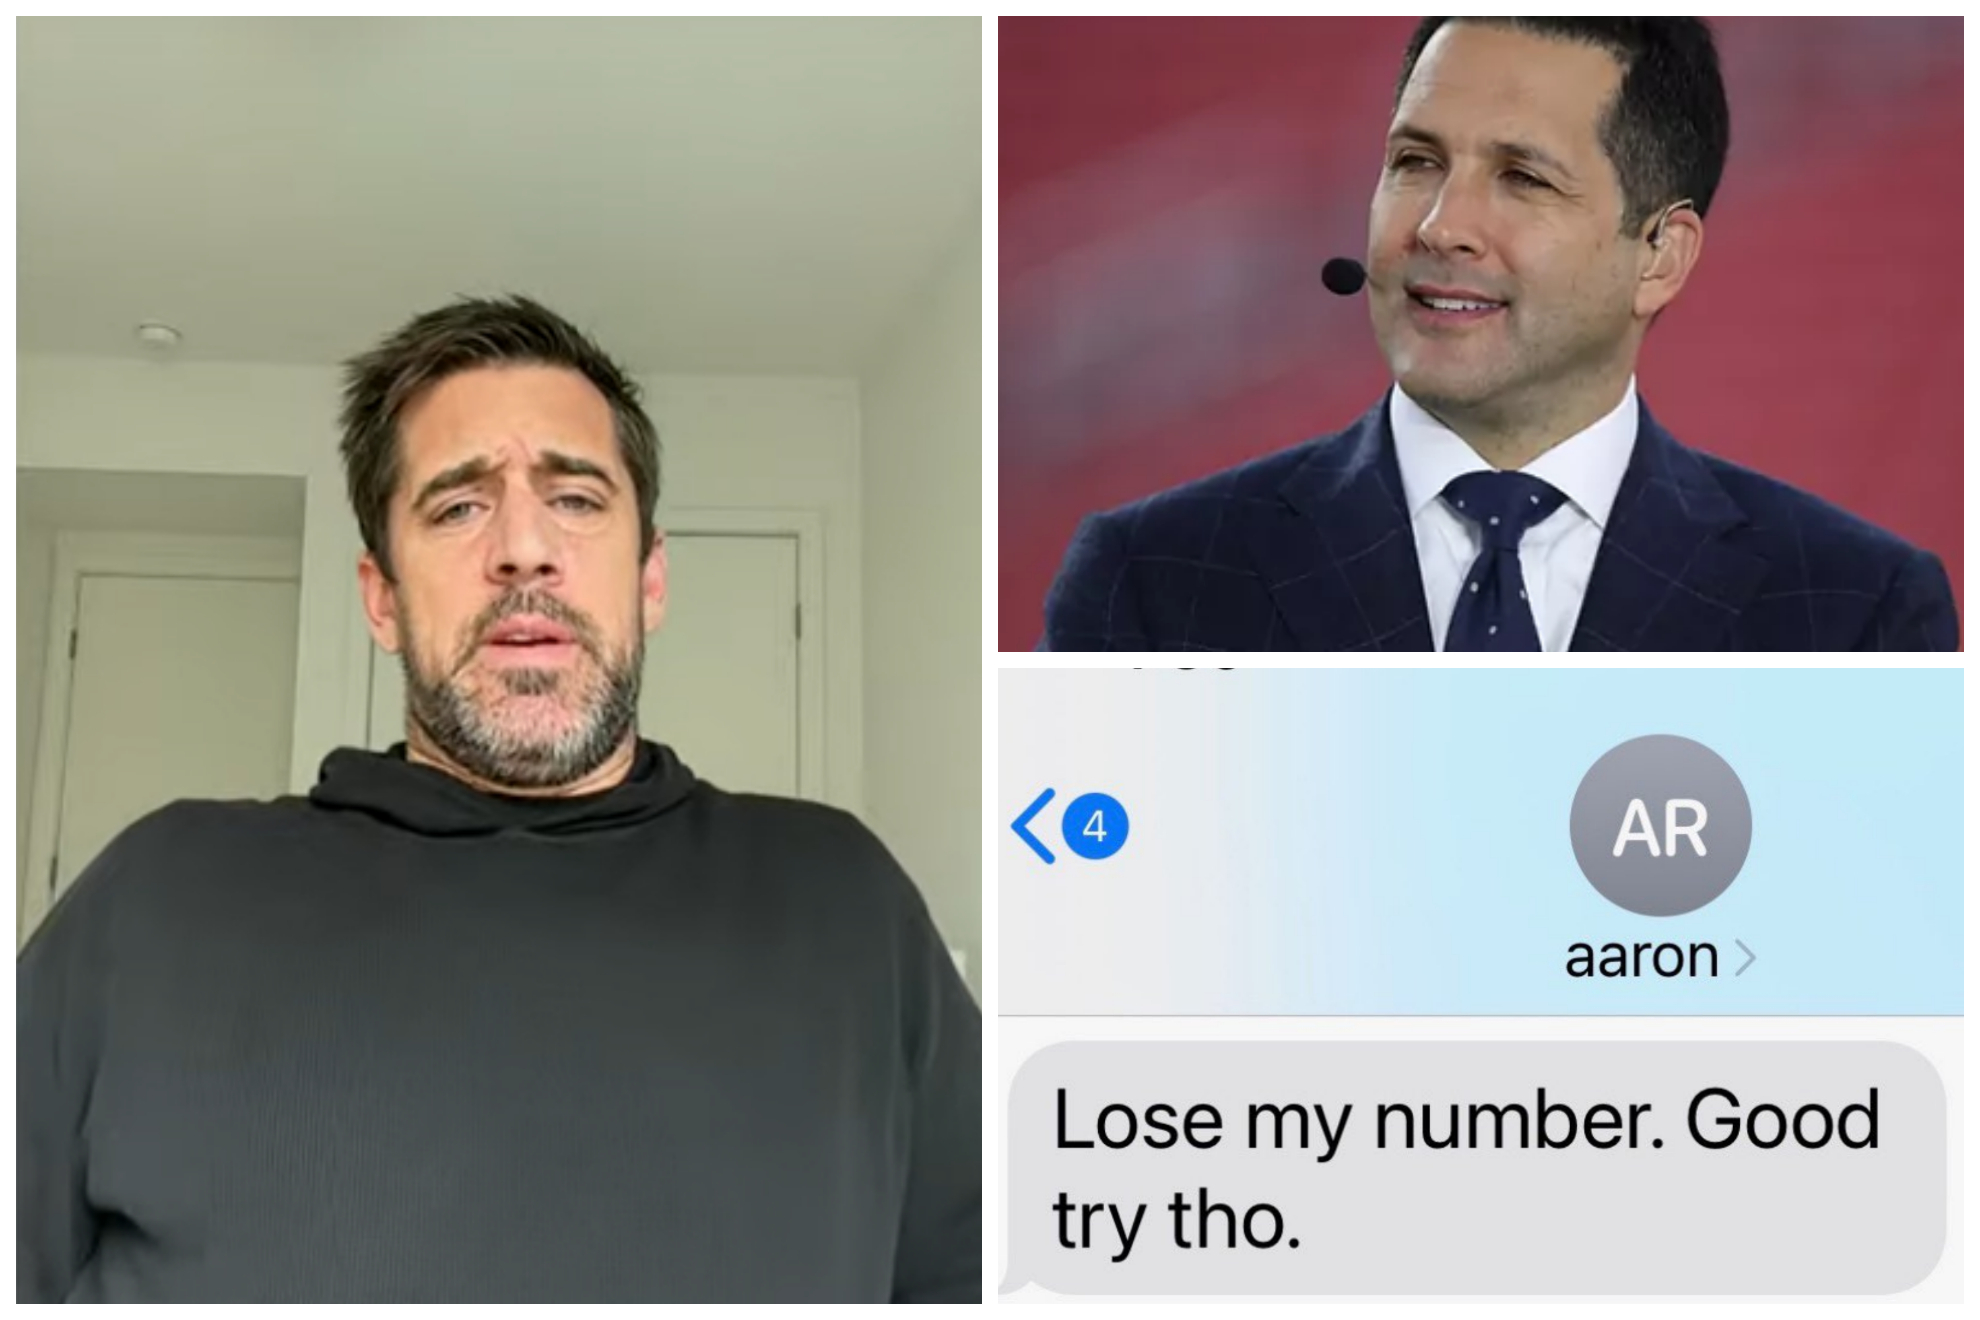 Aaron Rodgers wasn't pleased Adam Schefter posted his text message on Twitter.